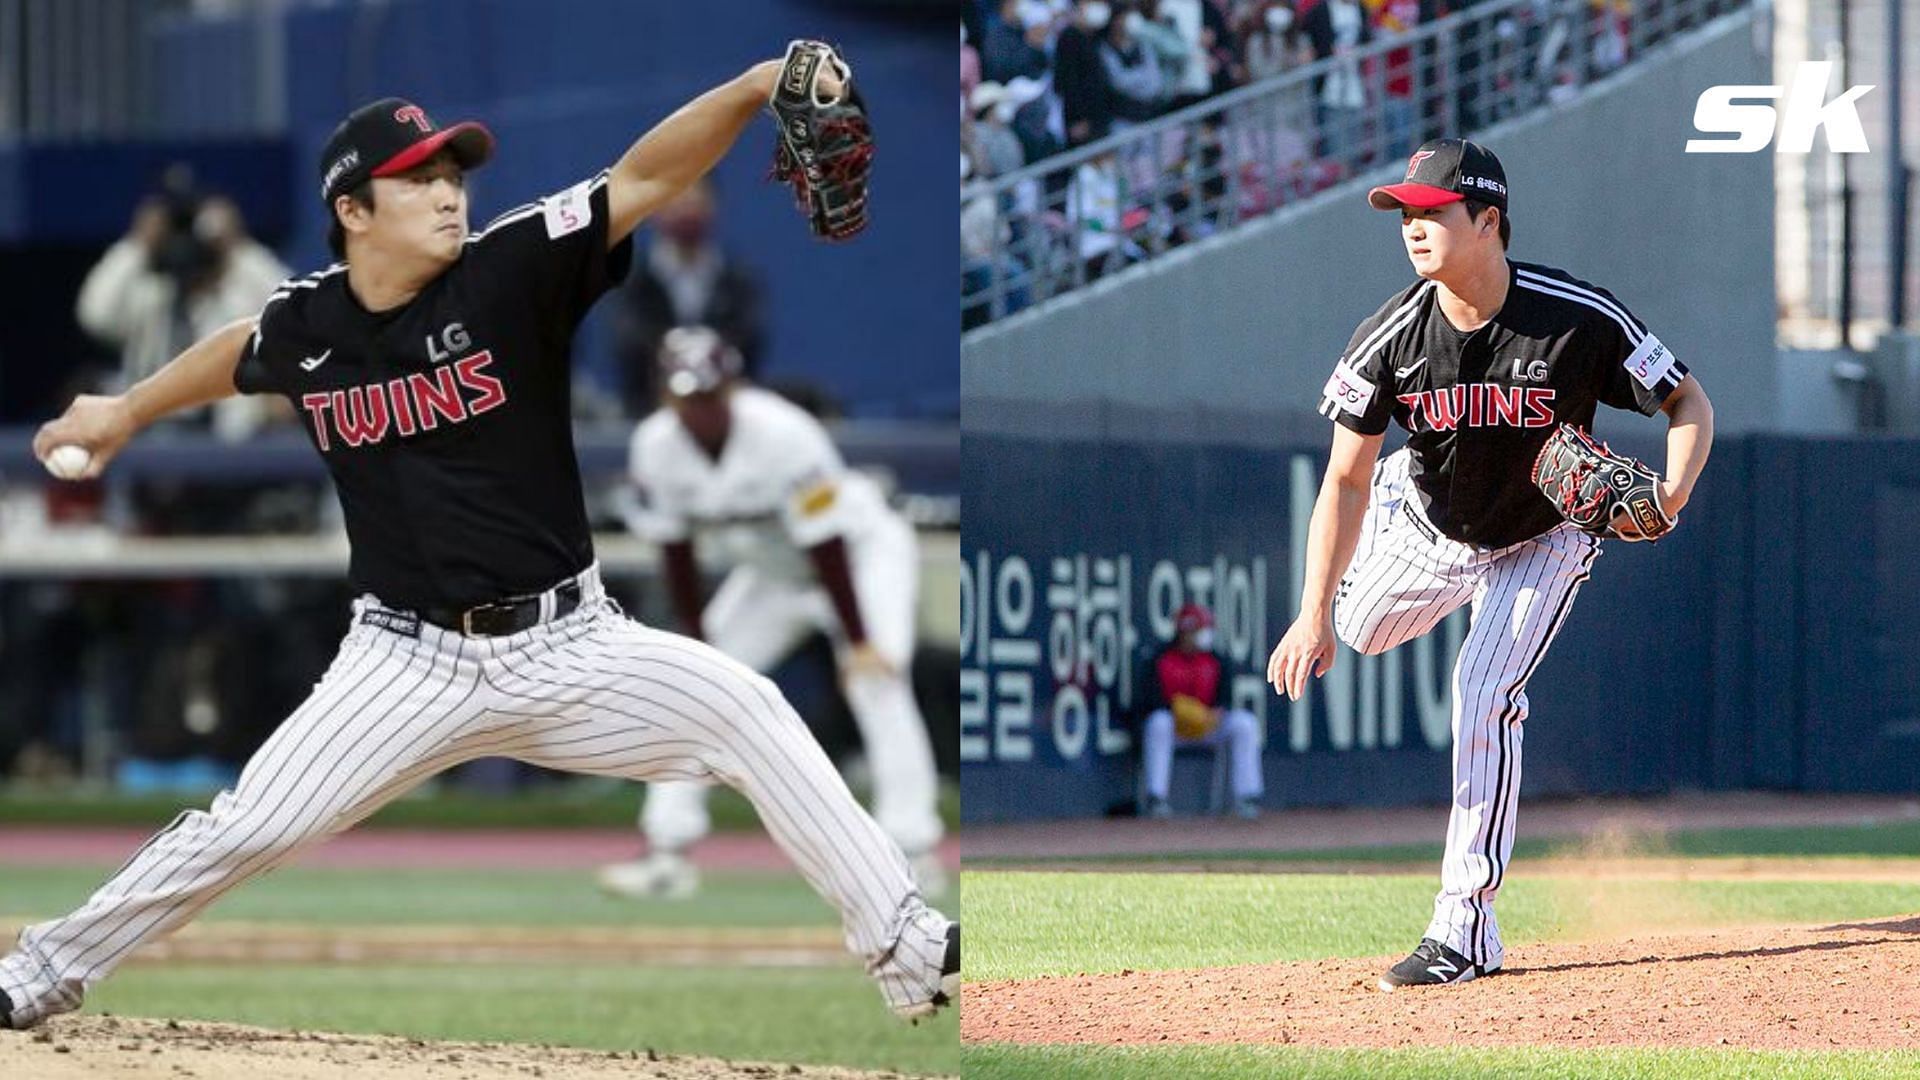 Korean relief pitcher Woo Suk Go has requested to be posted for MLB teams this offseason